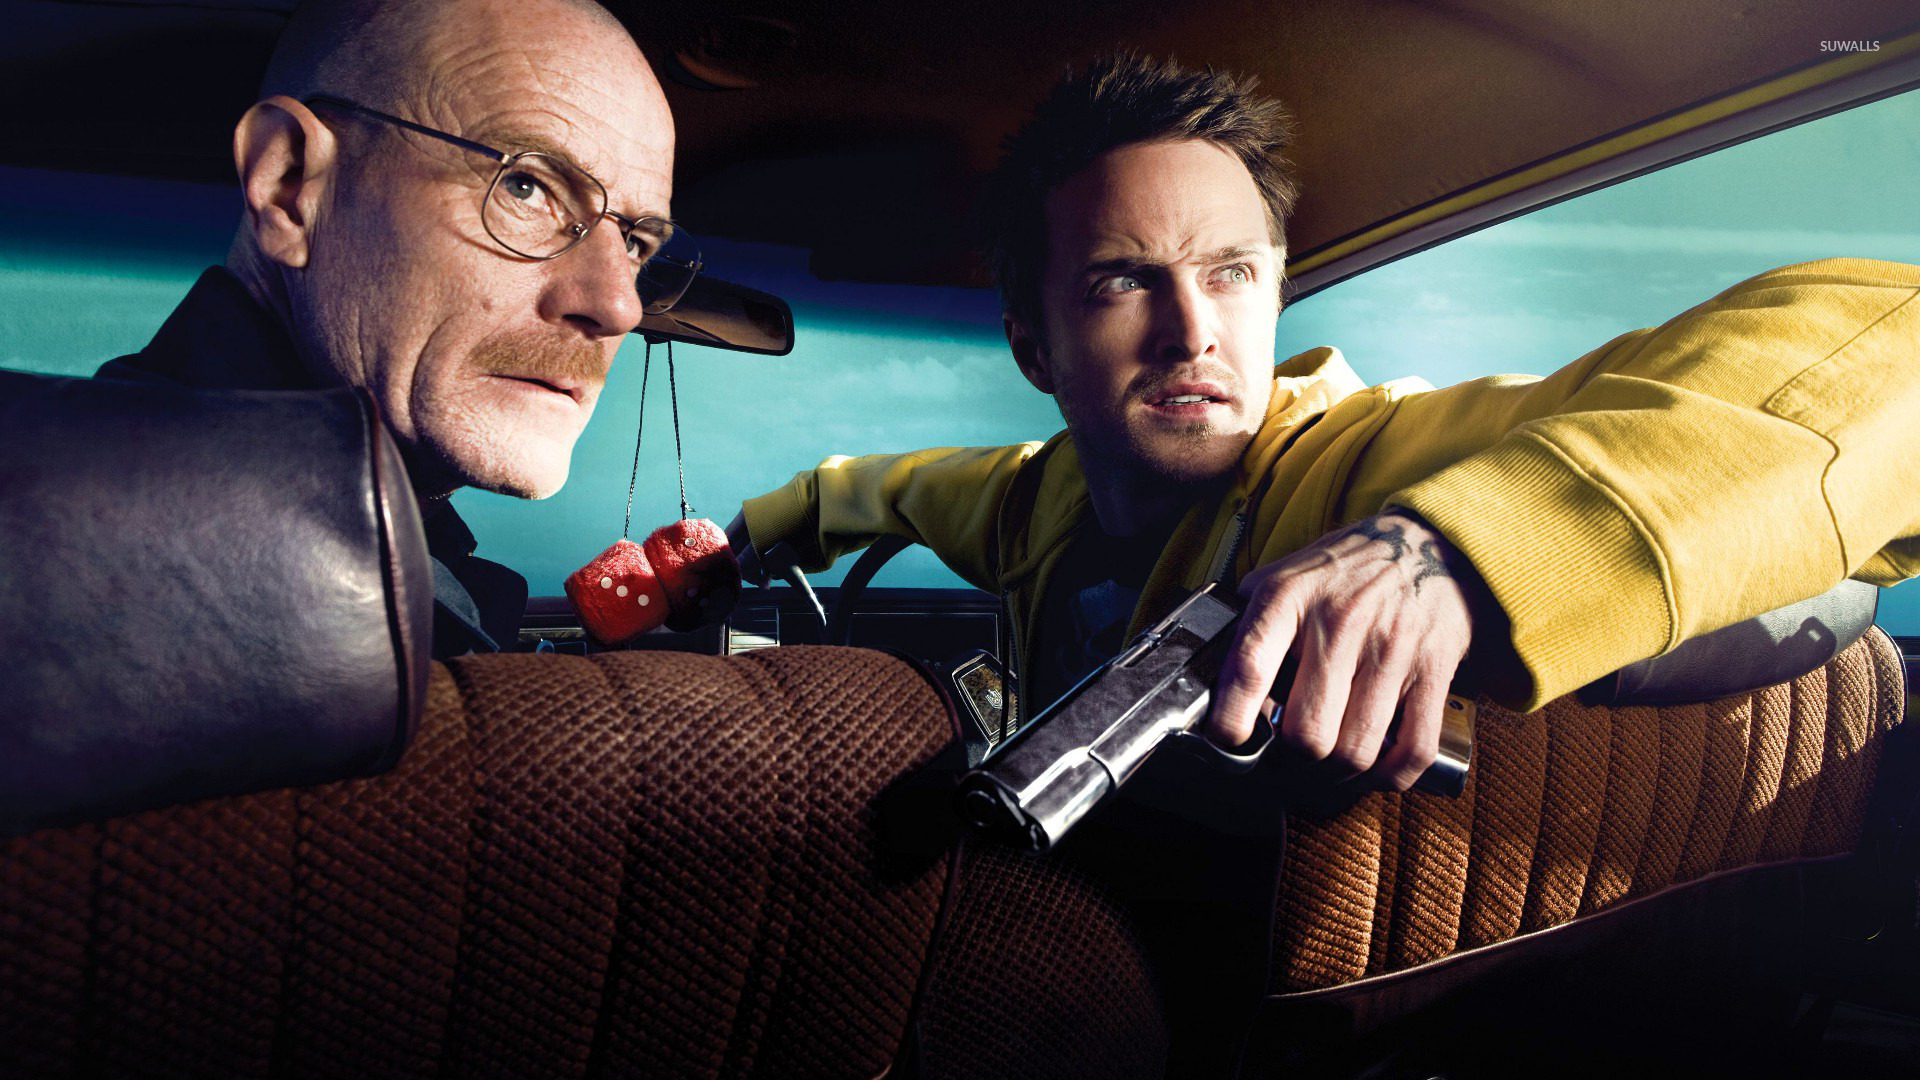 Walter White and Jesse Pinkman from Breaking Bad Wallpaper 2k Quad HD  ID:3696